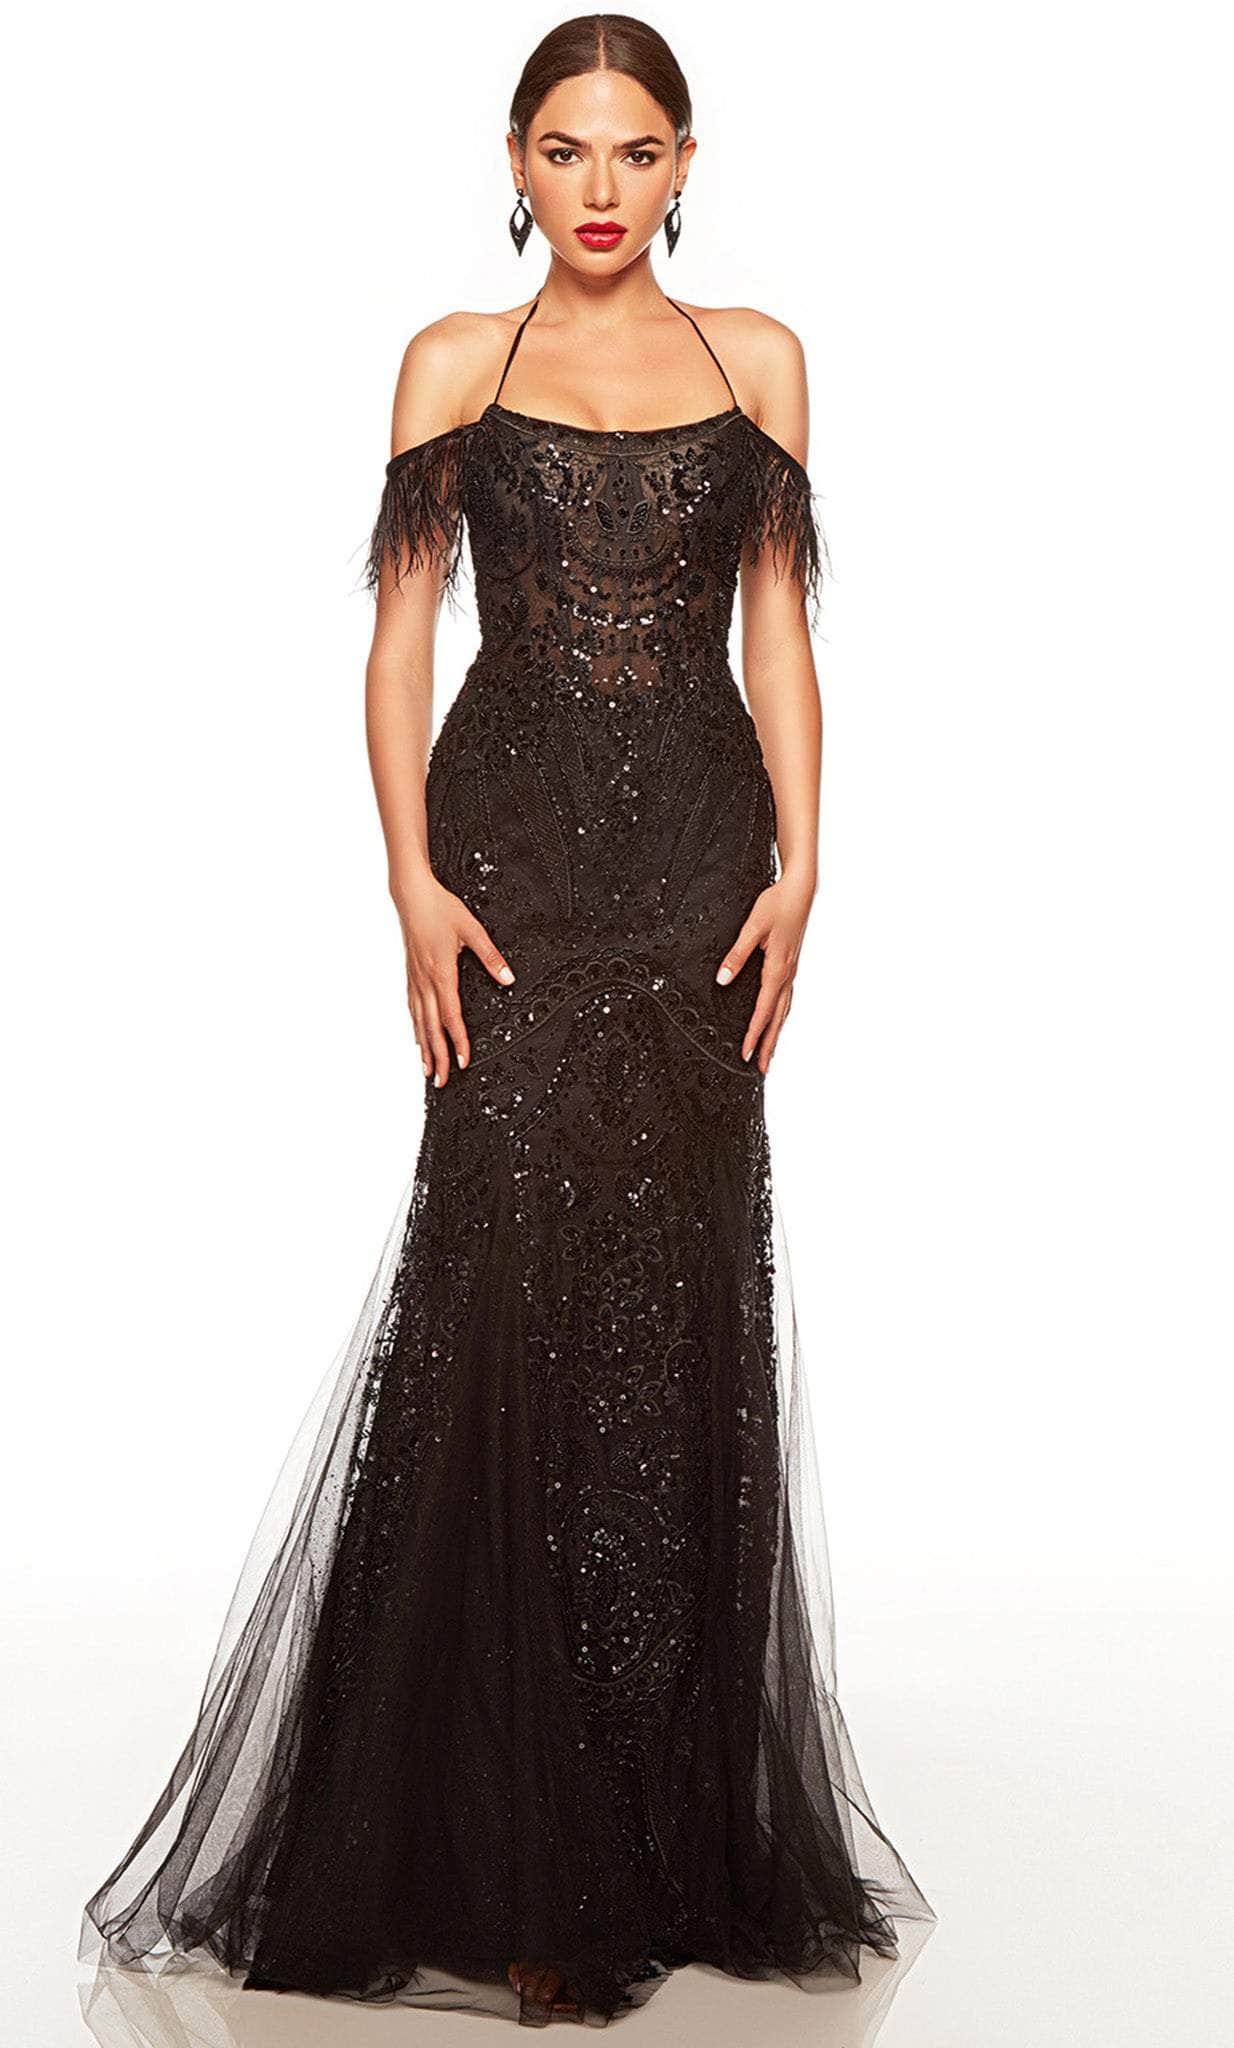 Alyce Paris 61416 - Beaded Lace Scoop Neck Prom Gown
